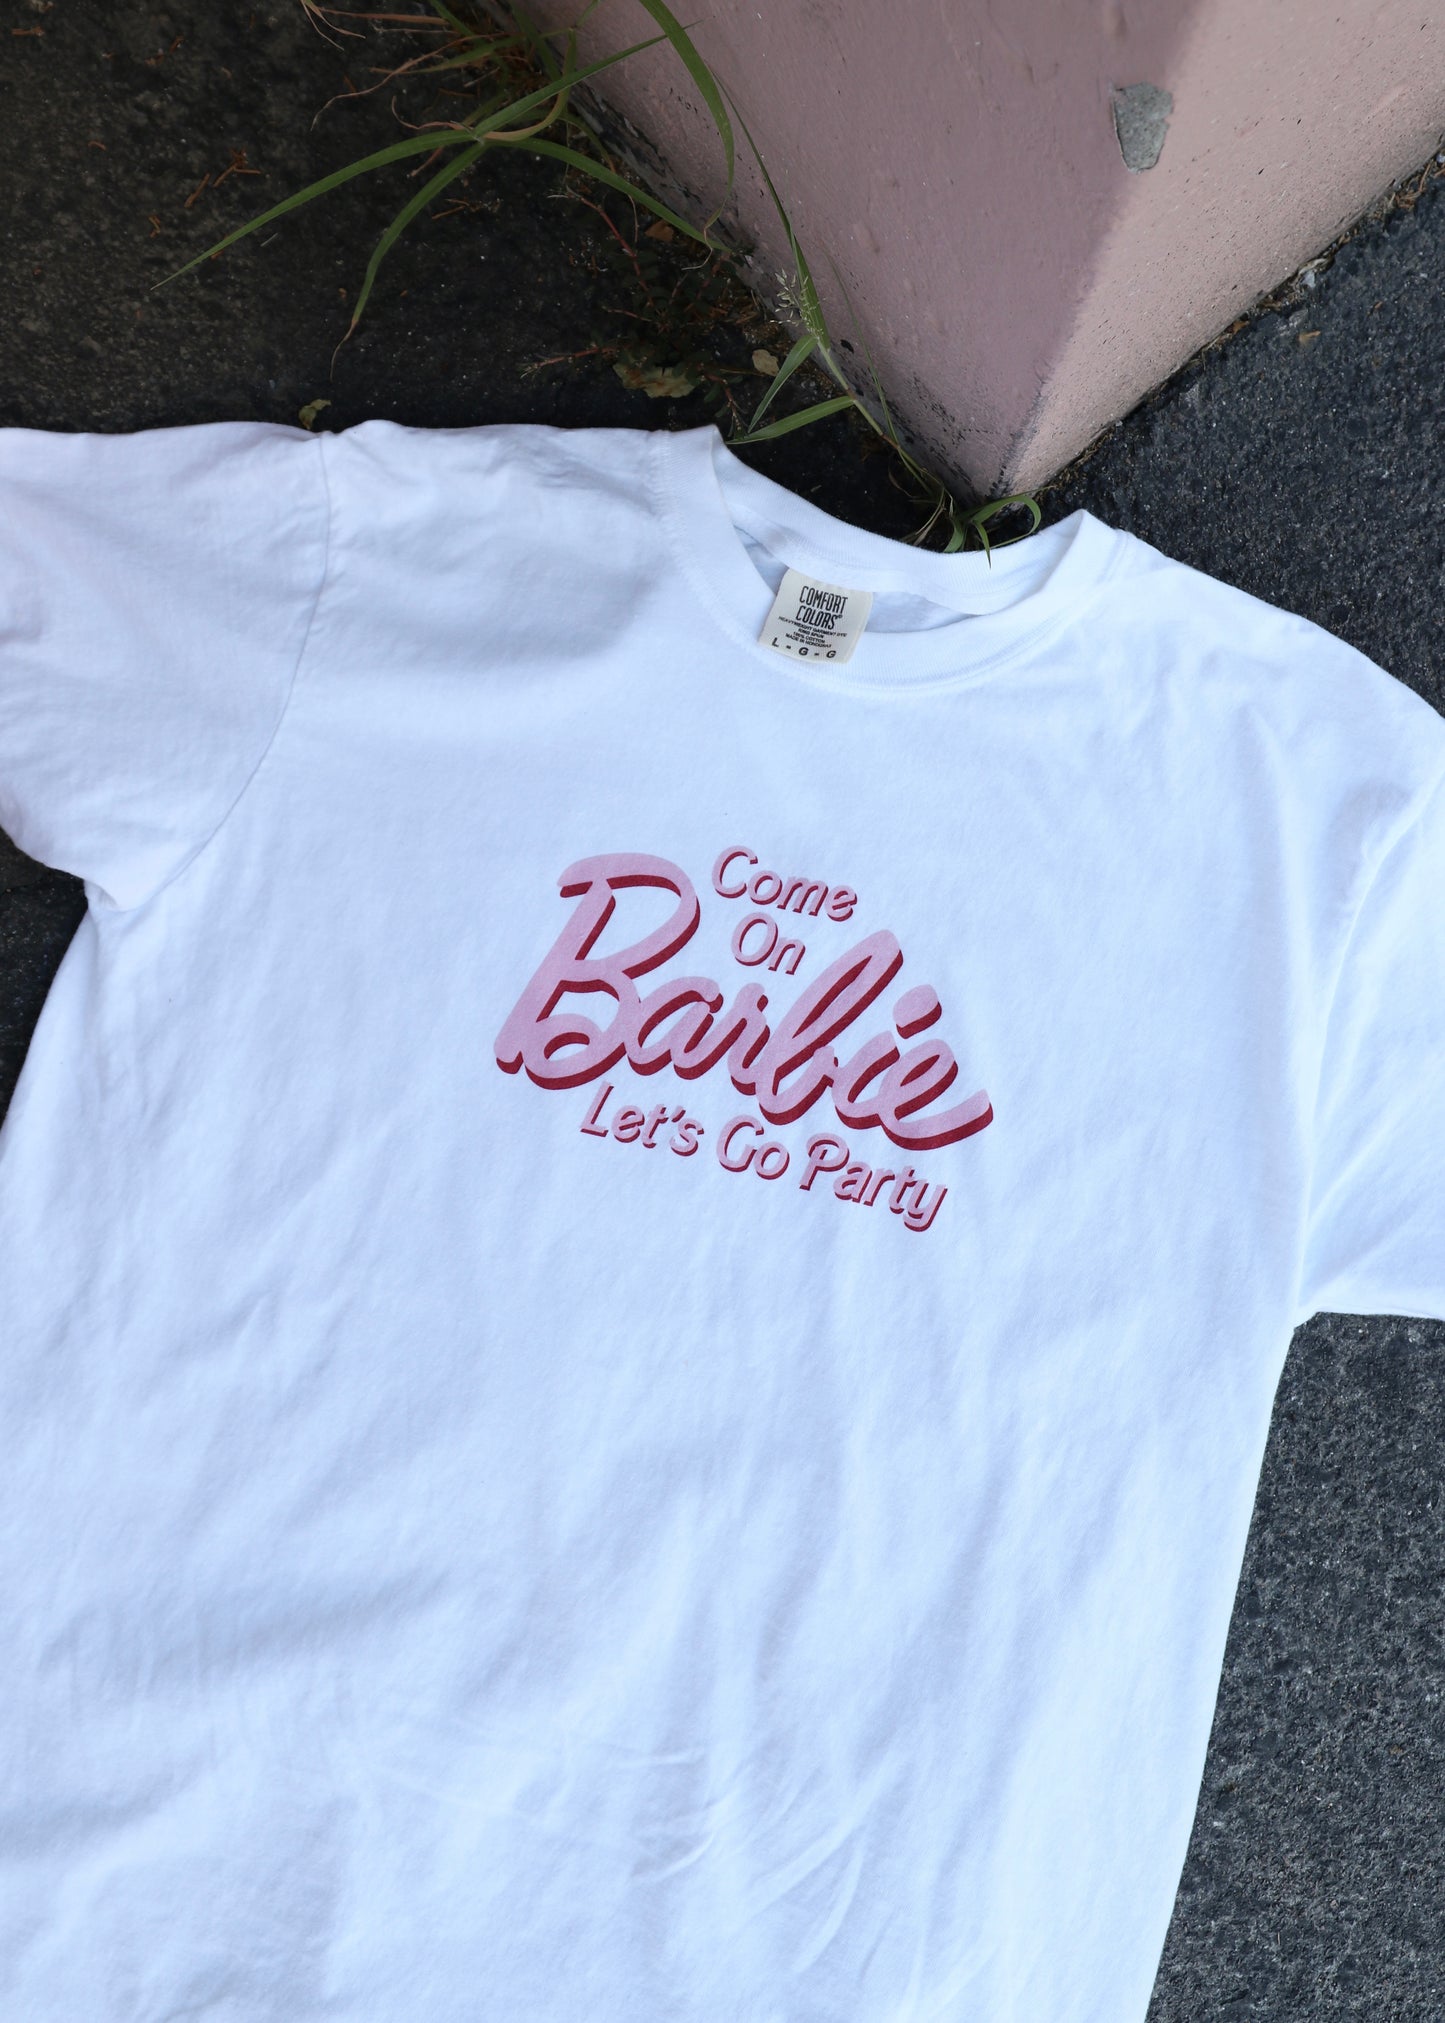 Come on Barbie let's go party tee